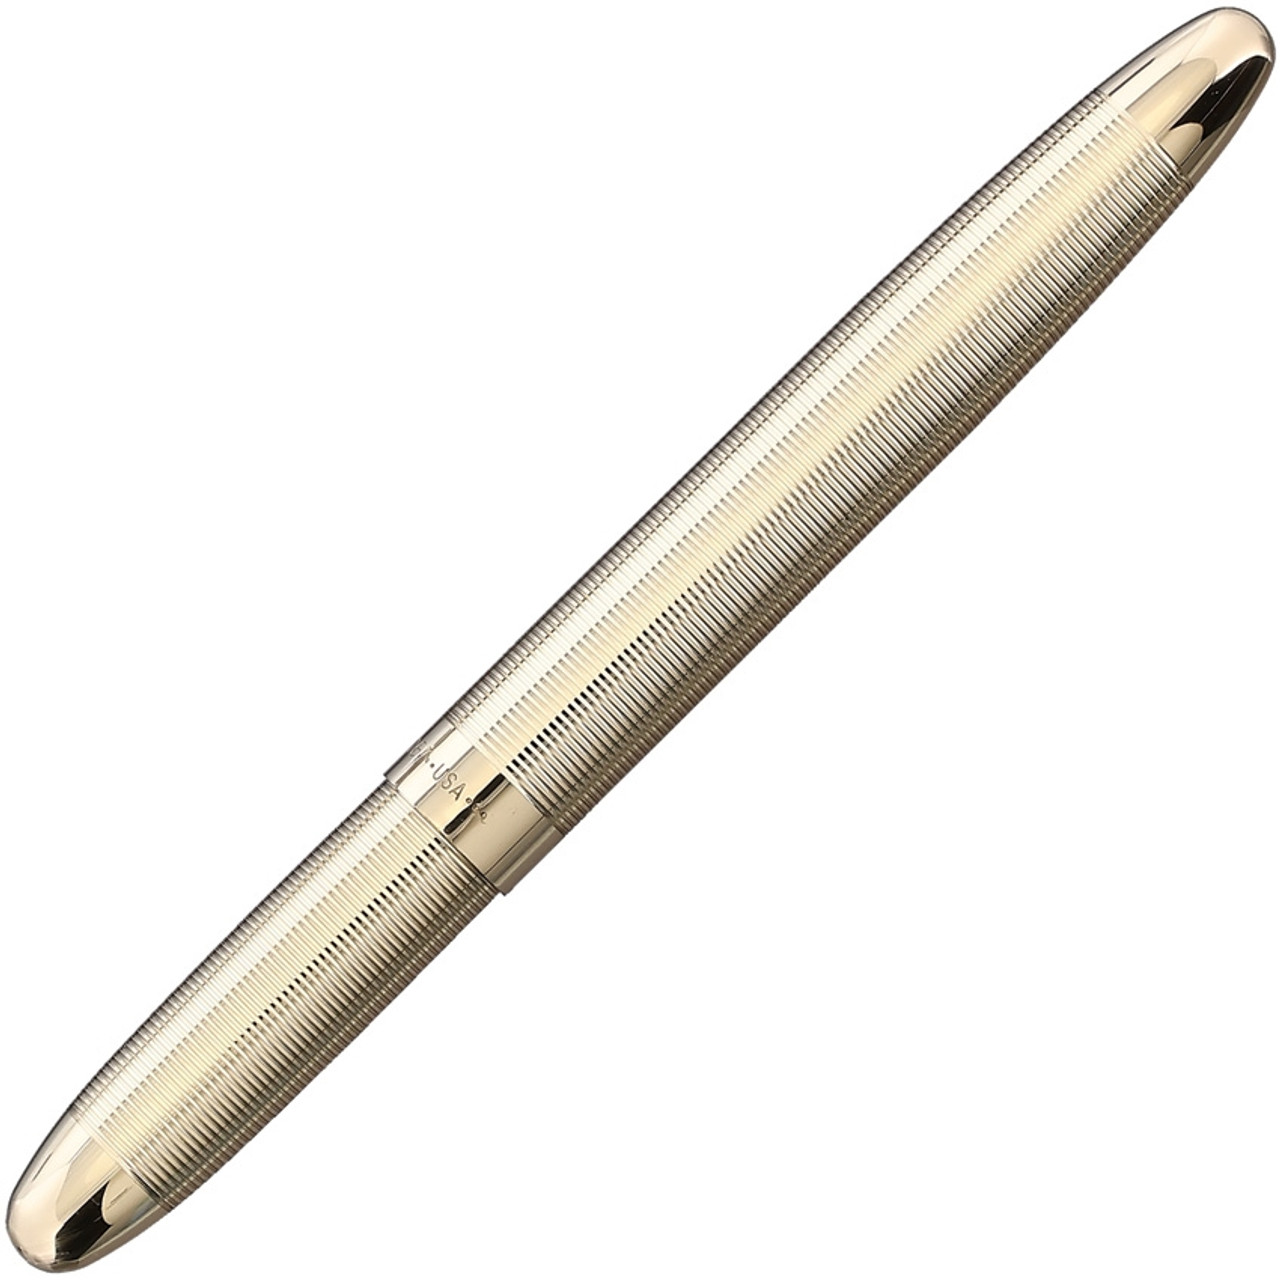 Fisher Space Pens Bullet (FP843088) 3.75" Lacquered Brass Barrel, Lacquered Brass Cap, PR4 Black Ink, Medium Point